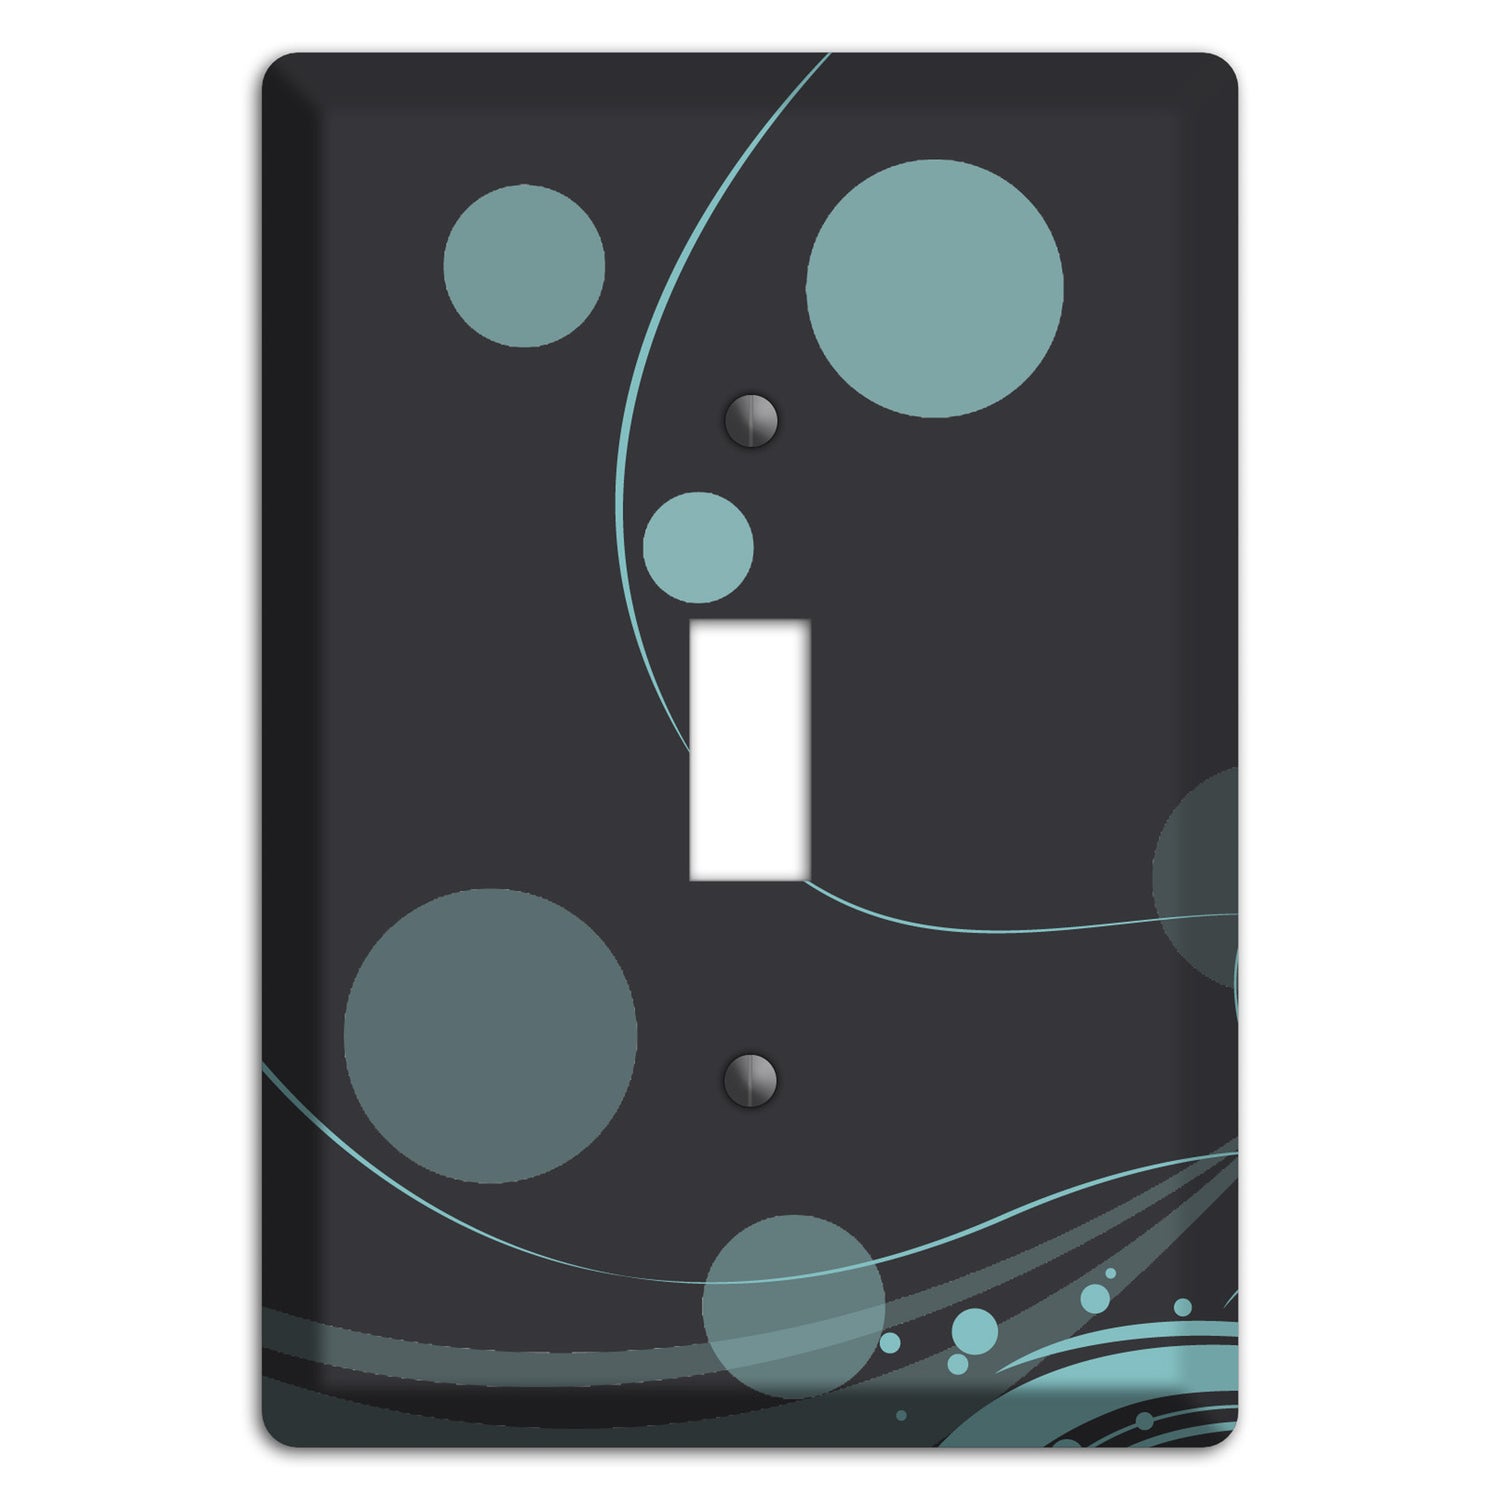 Dark Grey with Blue-grey Dots and Swirls Cover Plates